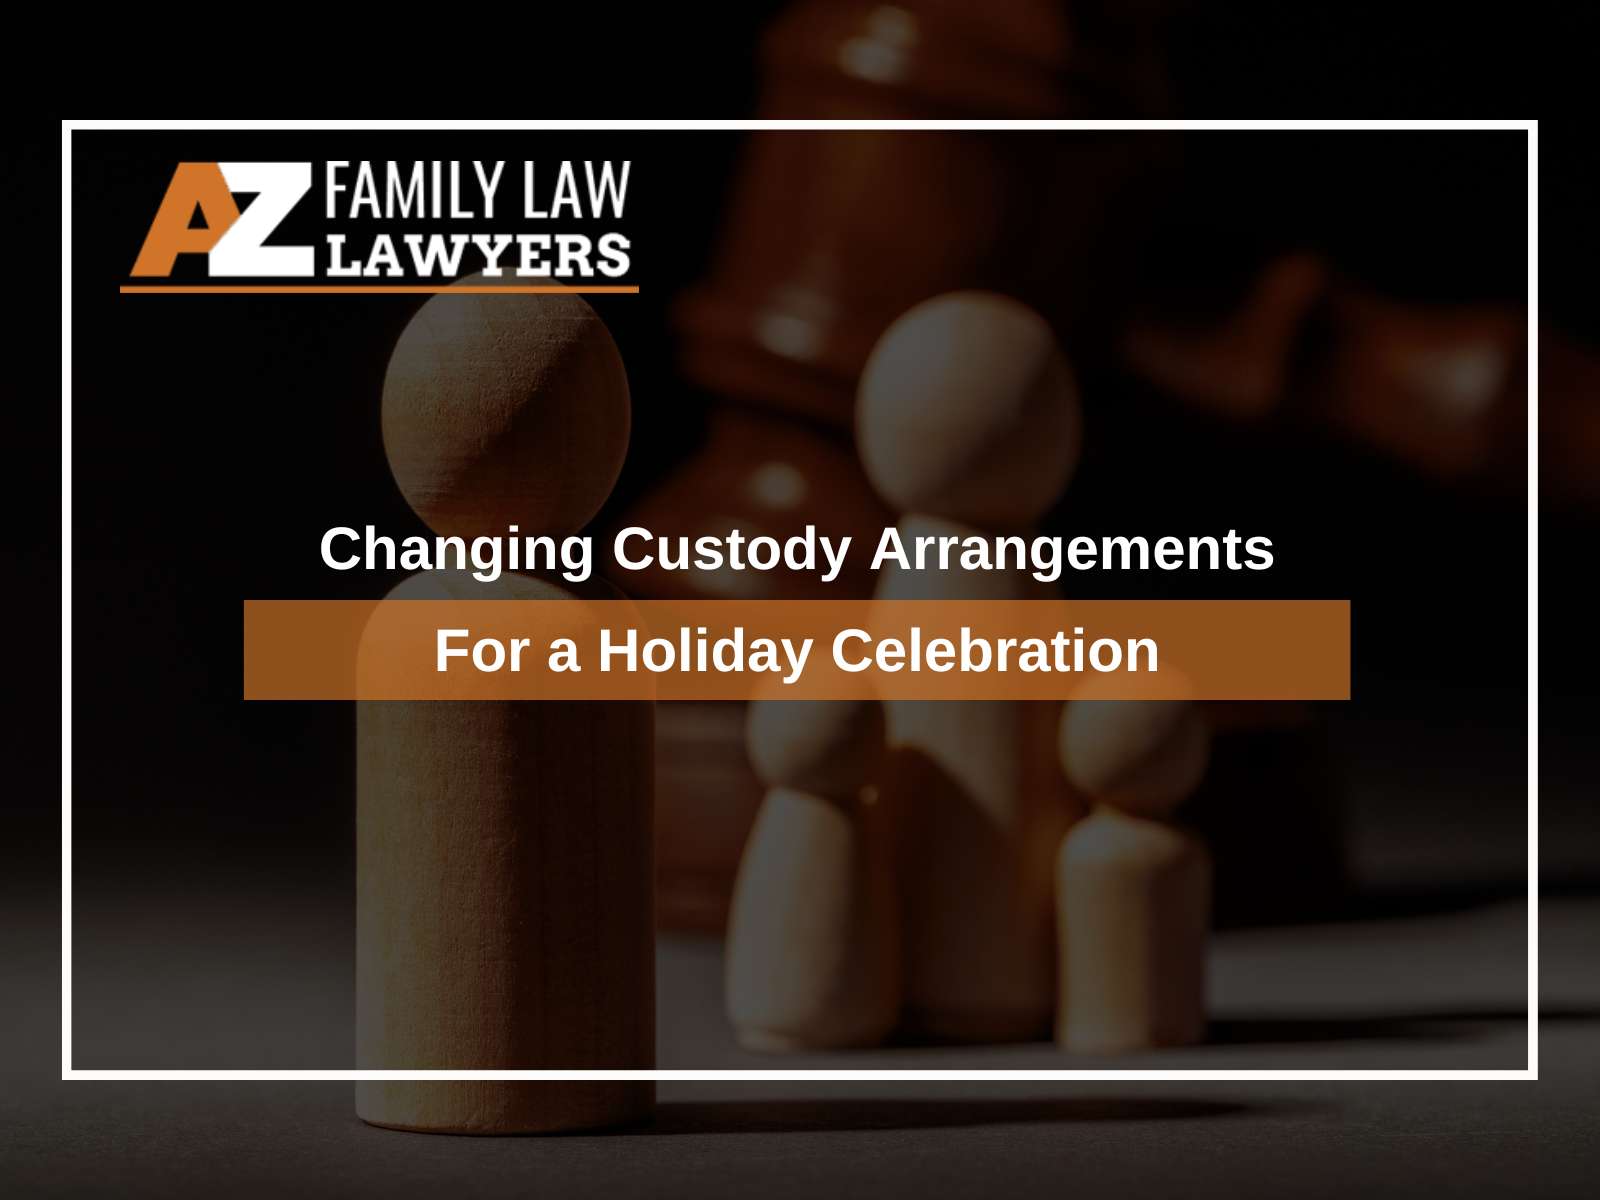 Changing Custody Arrangements For a Holiday Celebration